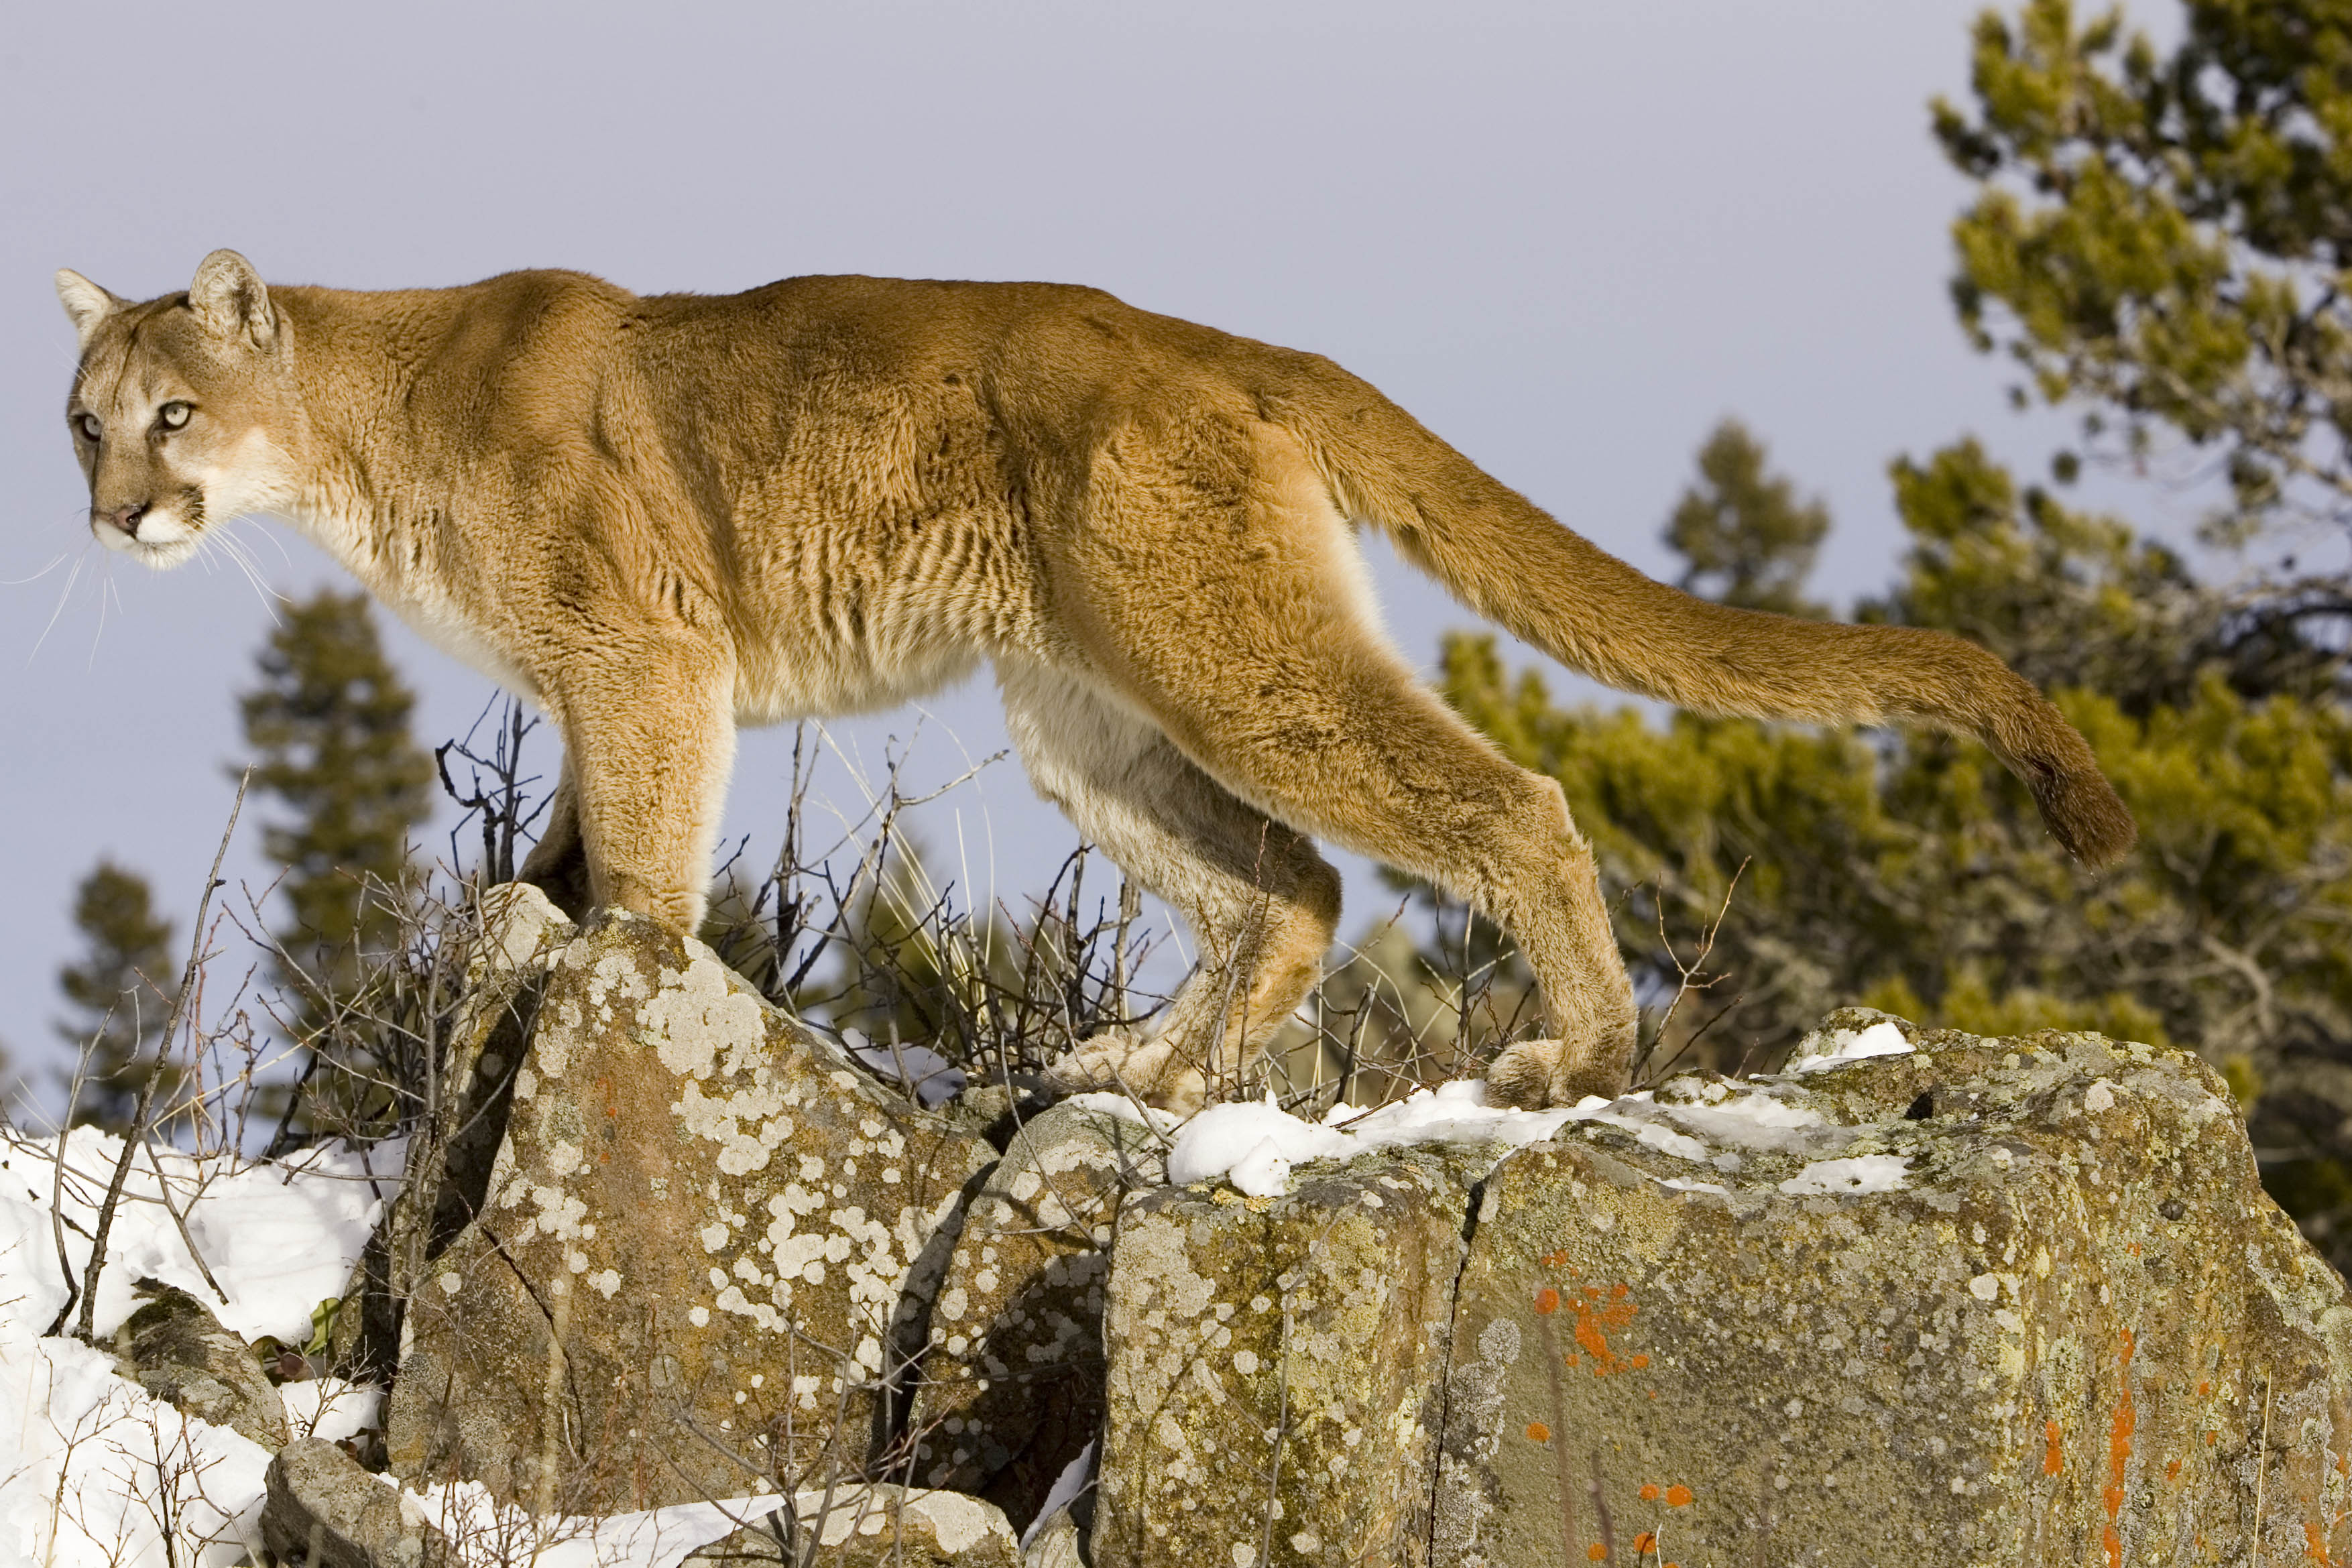 A mountain lion was captured standing on rocky perch in North America. | Source: Getty Images